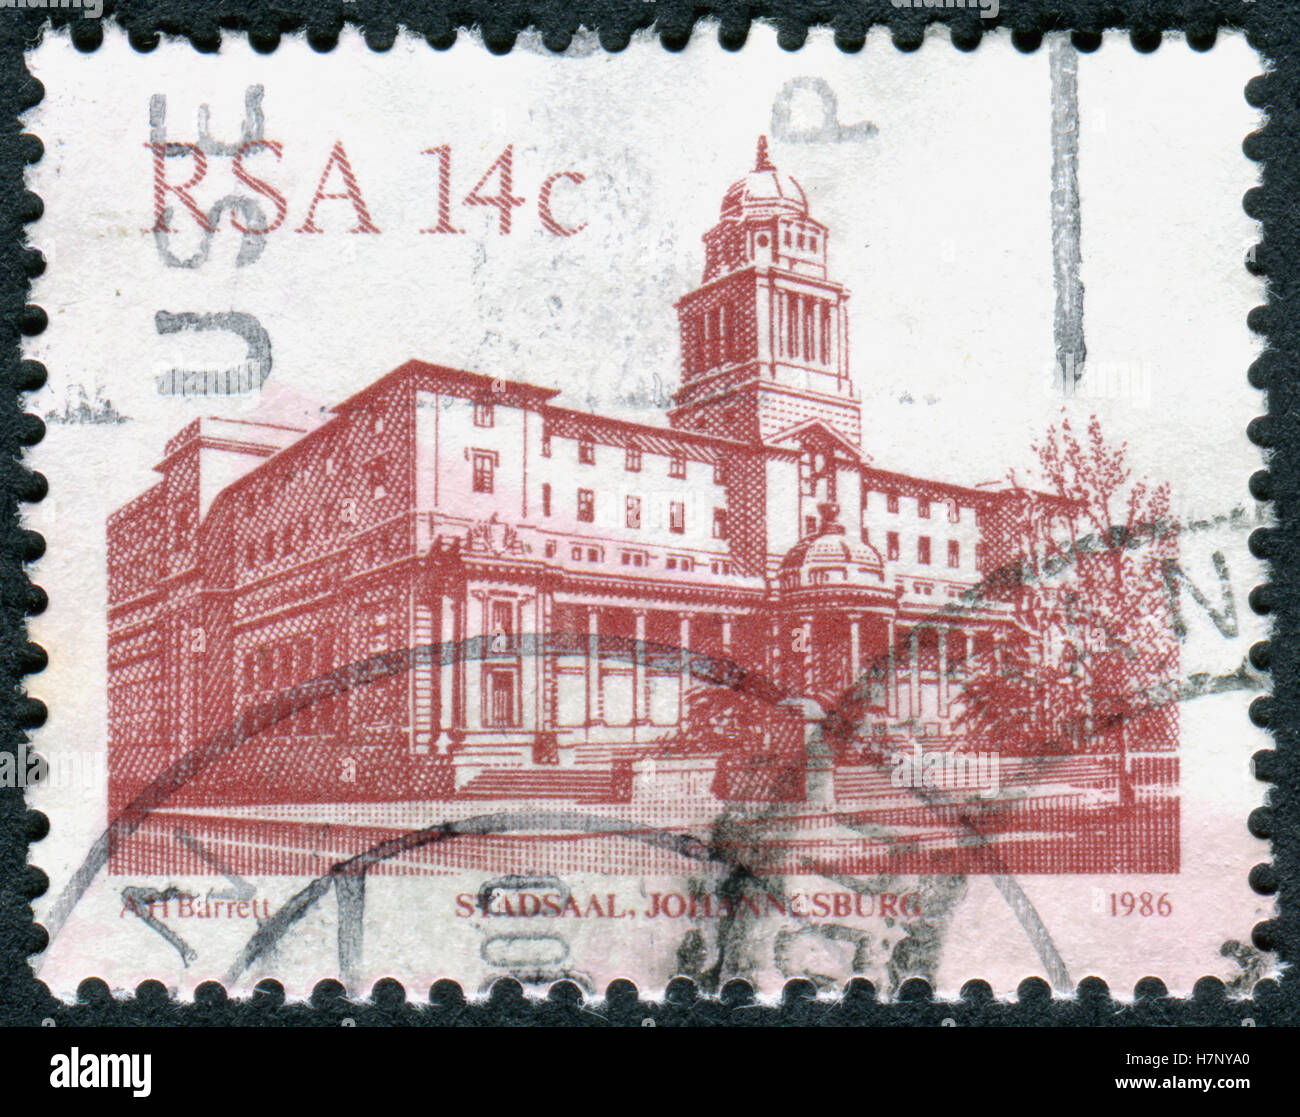 SOUTH AFRICA - CIRCA 1986: A stamp printed in South Africa, shows the building of Johannesburg City Hall, circa 1986 Stock Photo